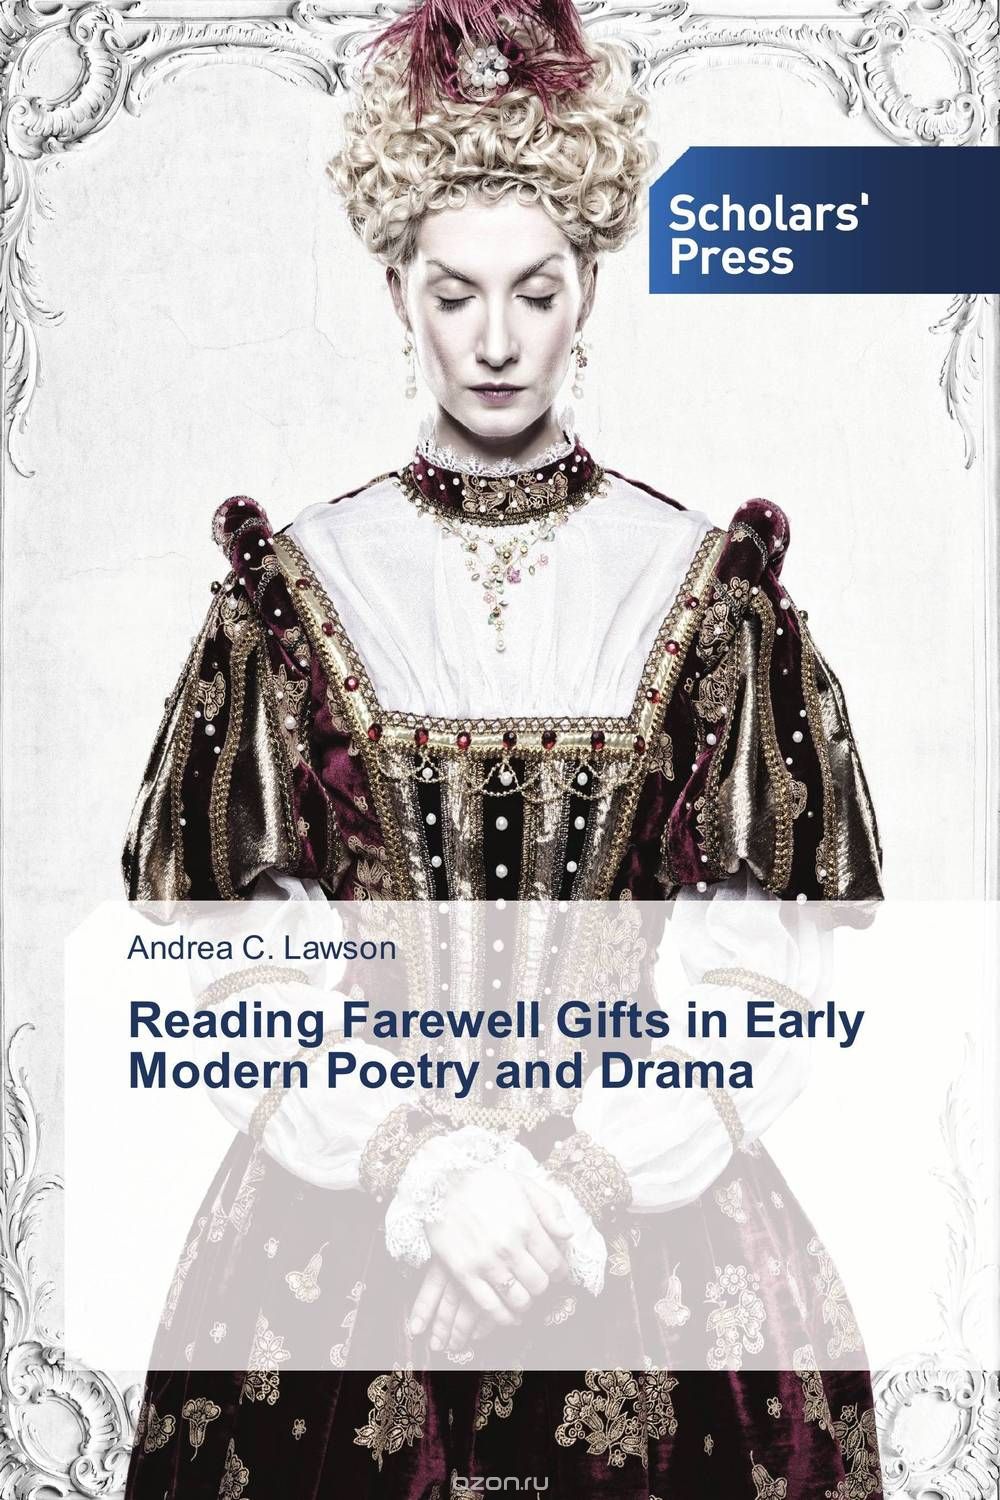 Скачать книгу "Reading Farewell Gifts in Early Modern Poetry and Drama"